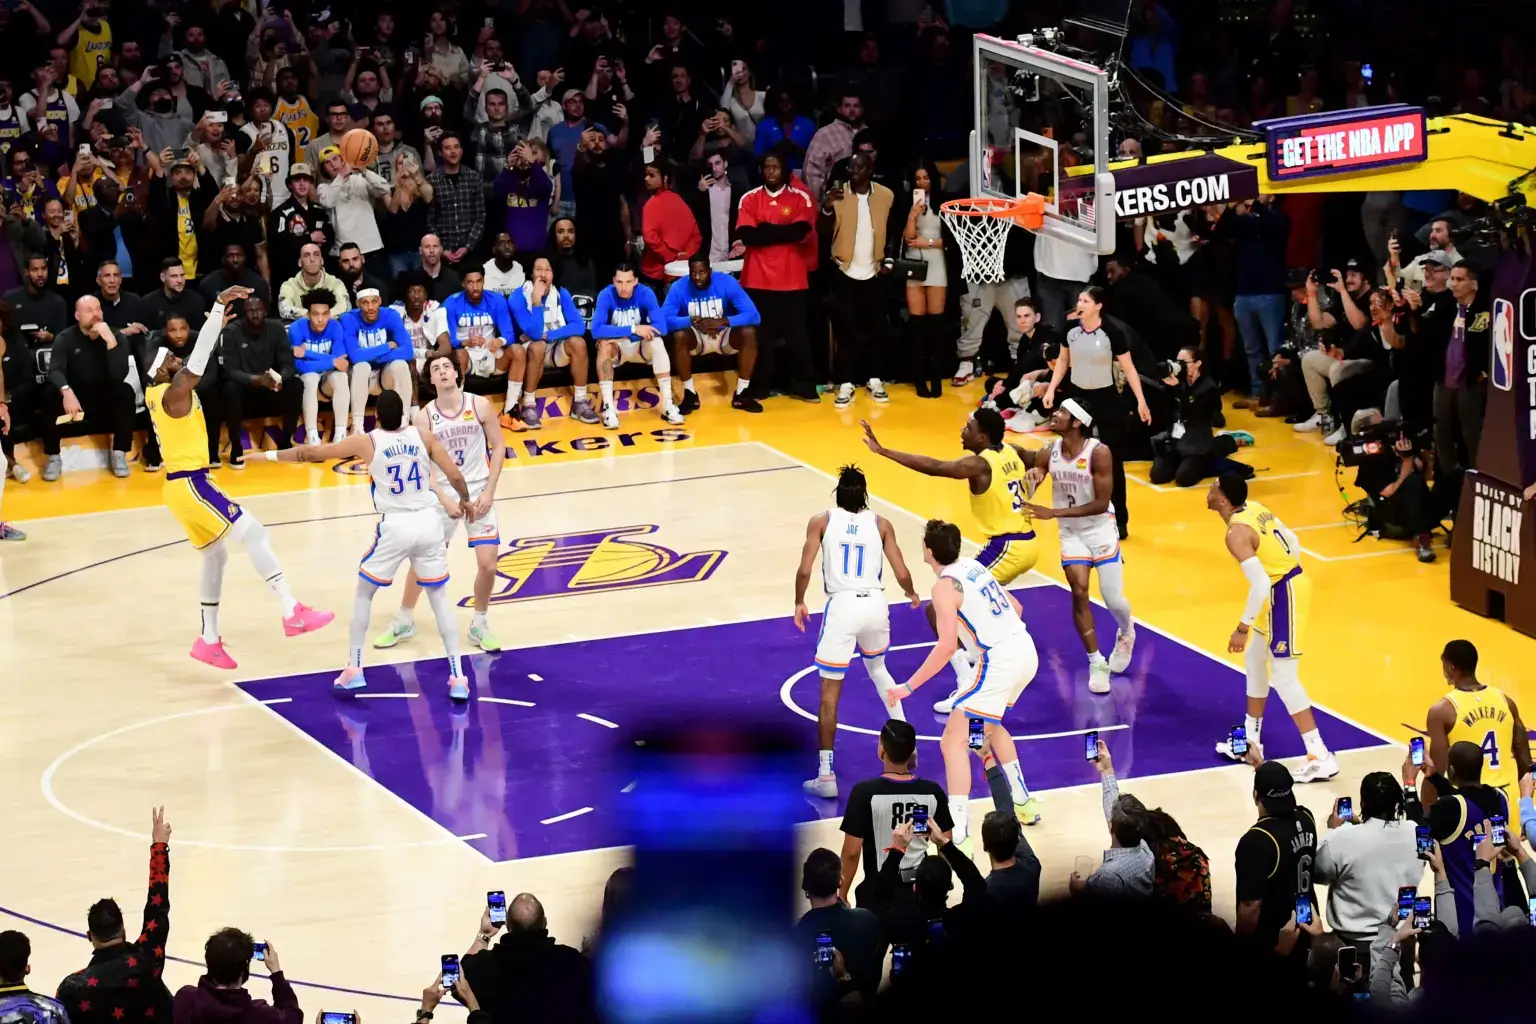 Lakers ticket prices soar as LeBron James approaches NBA scoring record